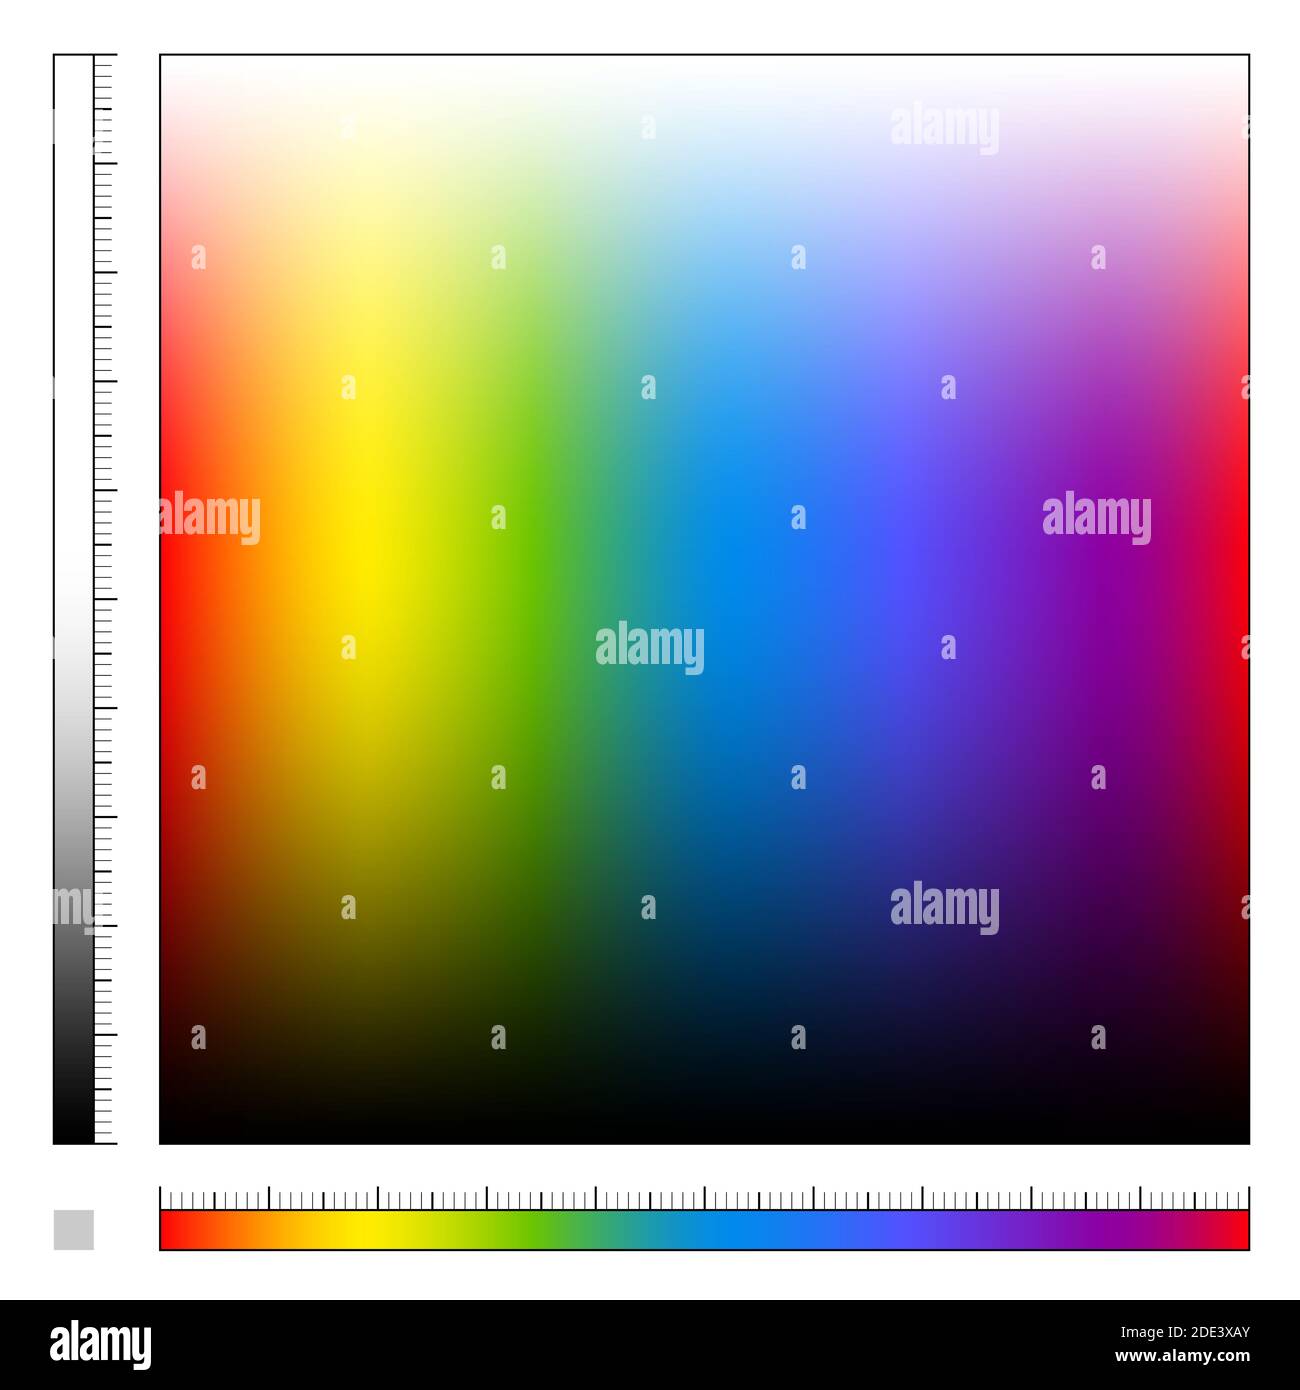 Color field with different saturation and rainbow colored gradient, spectrum of visible light, all colors of the rainbow from light to dark. Stock Photo